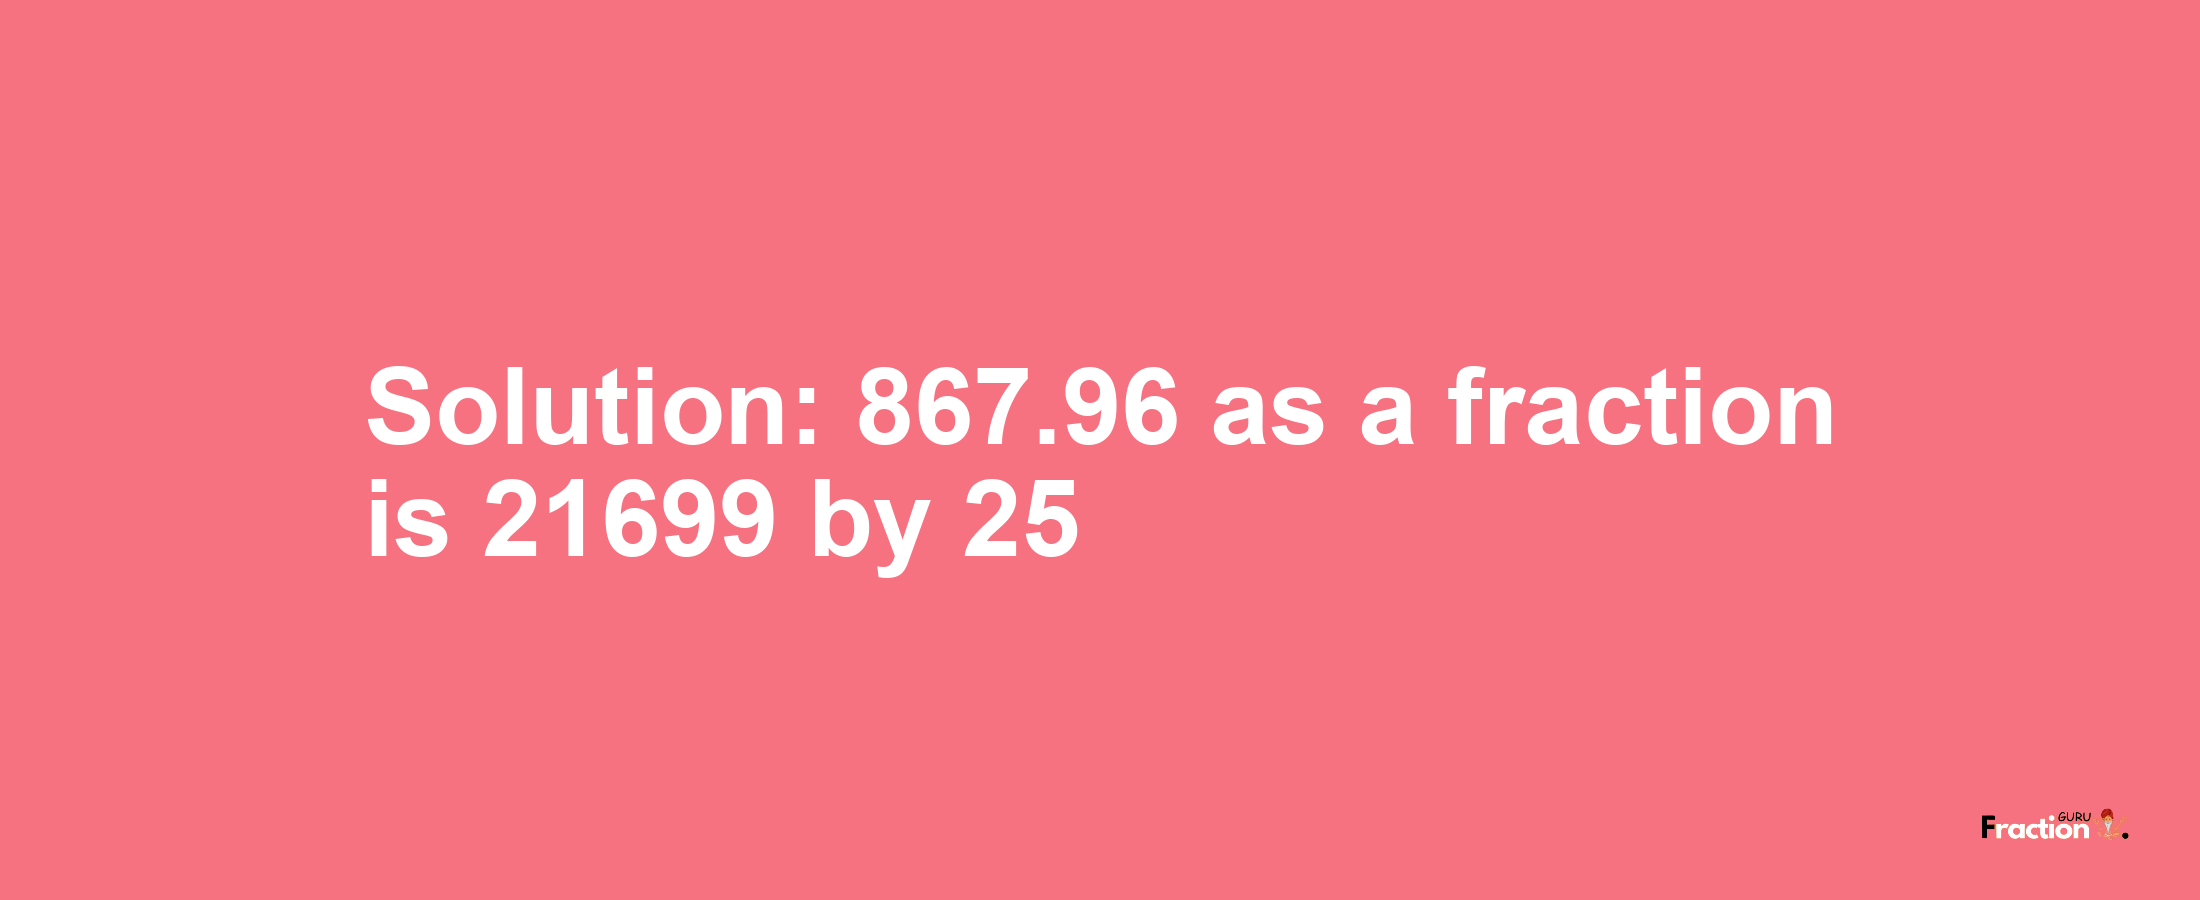 Solution:867.96 as a fraction is 21699/25